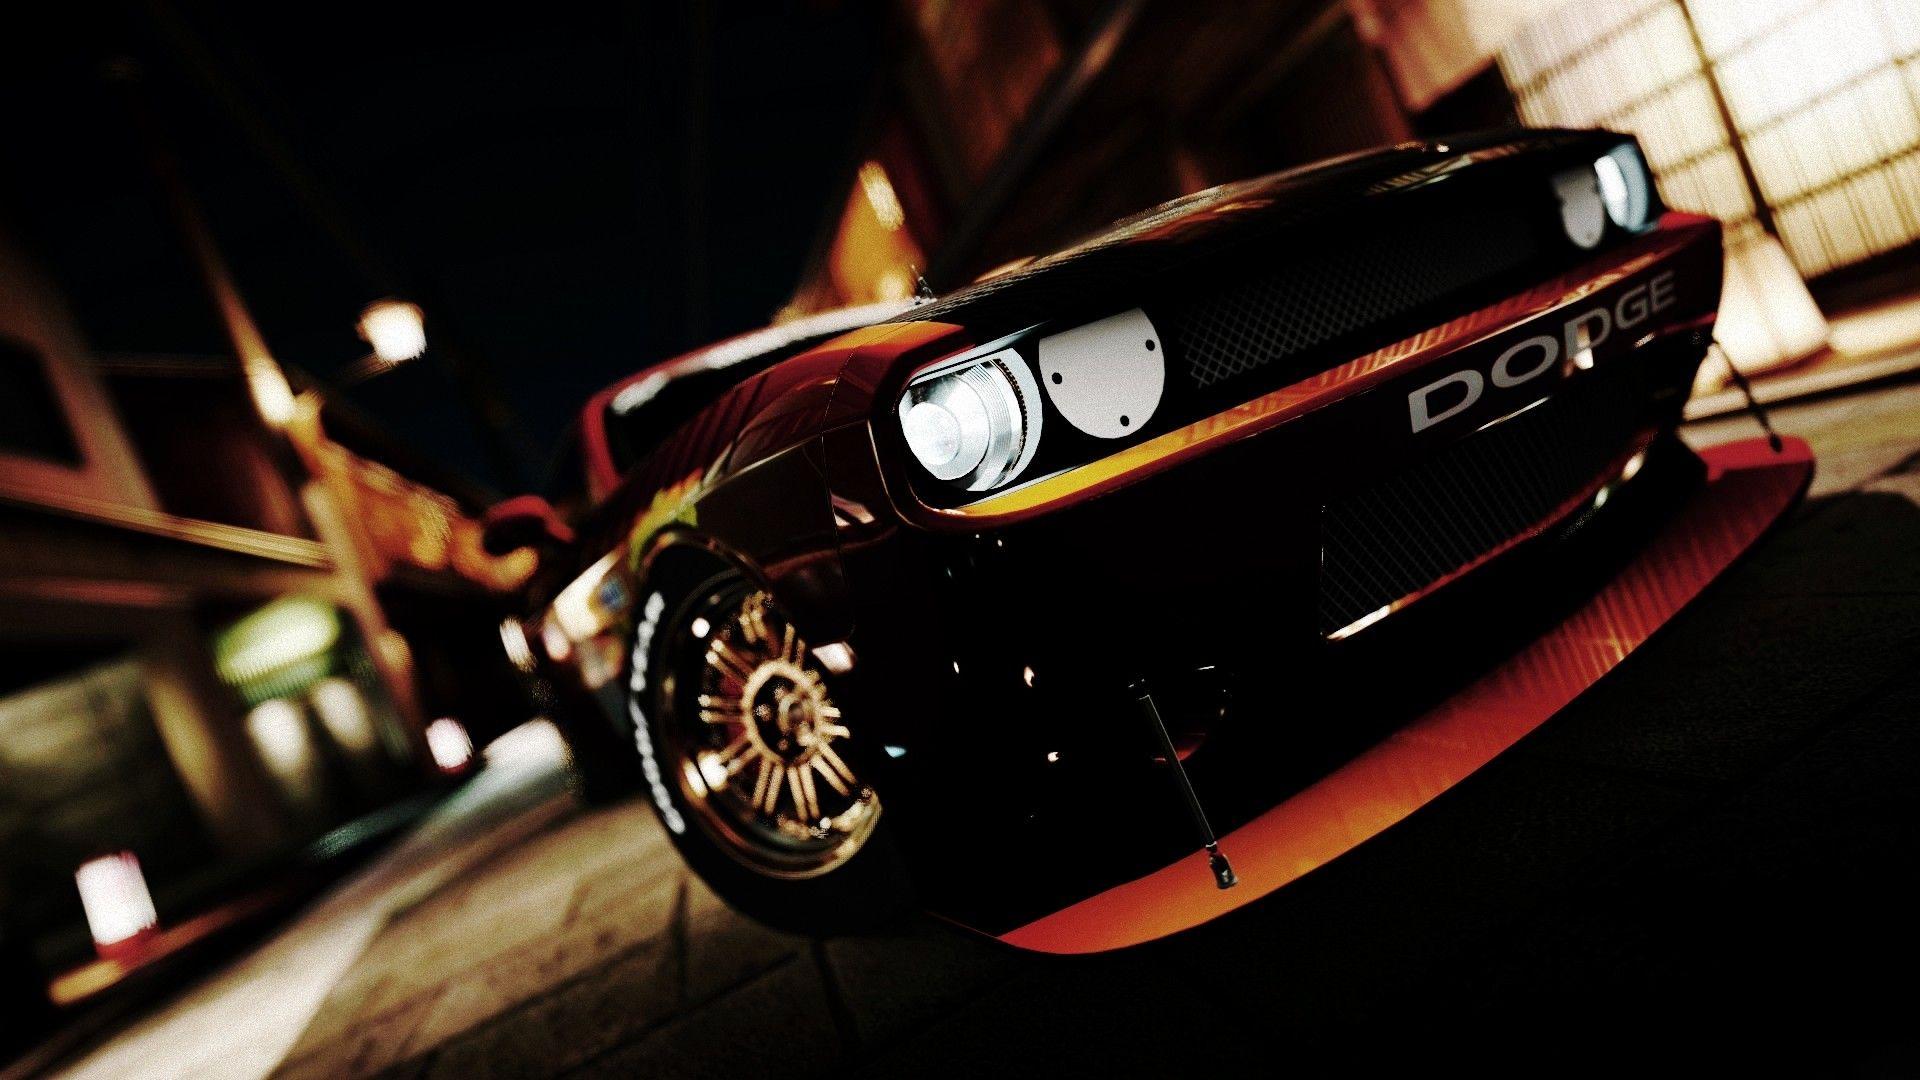 Awesome HD Car Game Wallpaper 1080p Image Background The Worlds